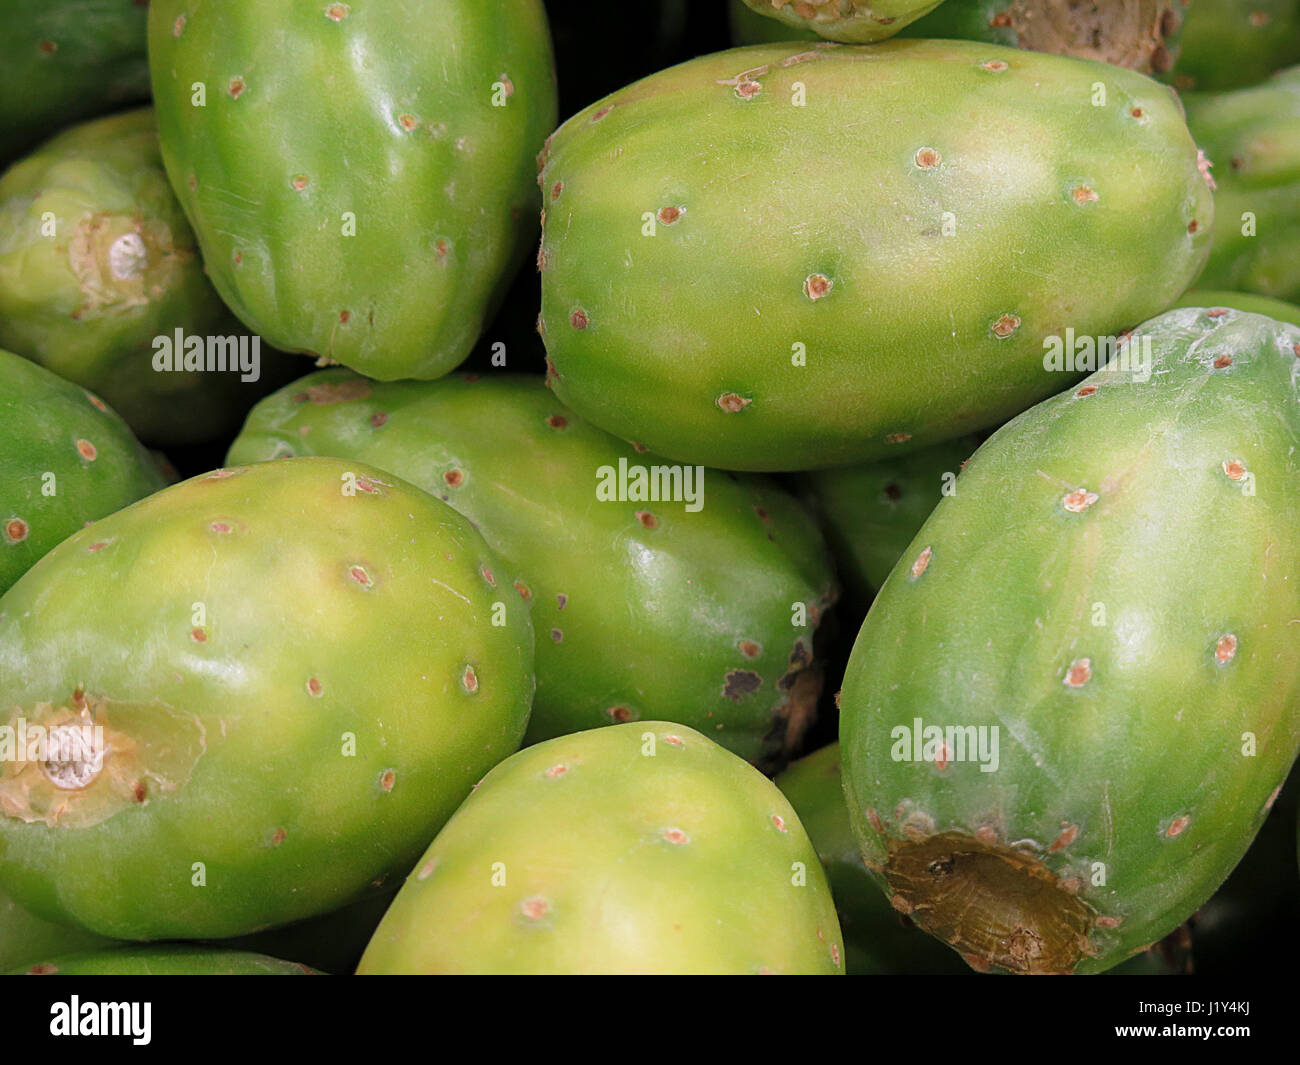 Prickly pear, delicious tropical fruit Stock Photo